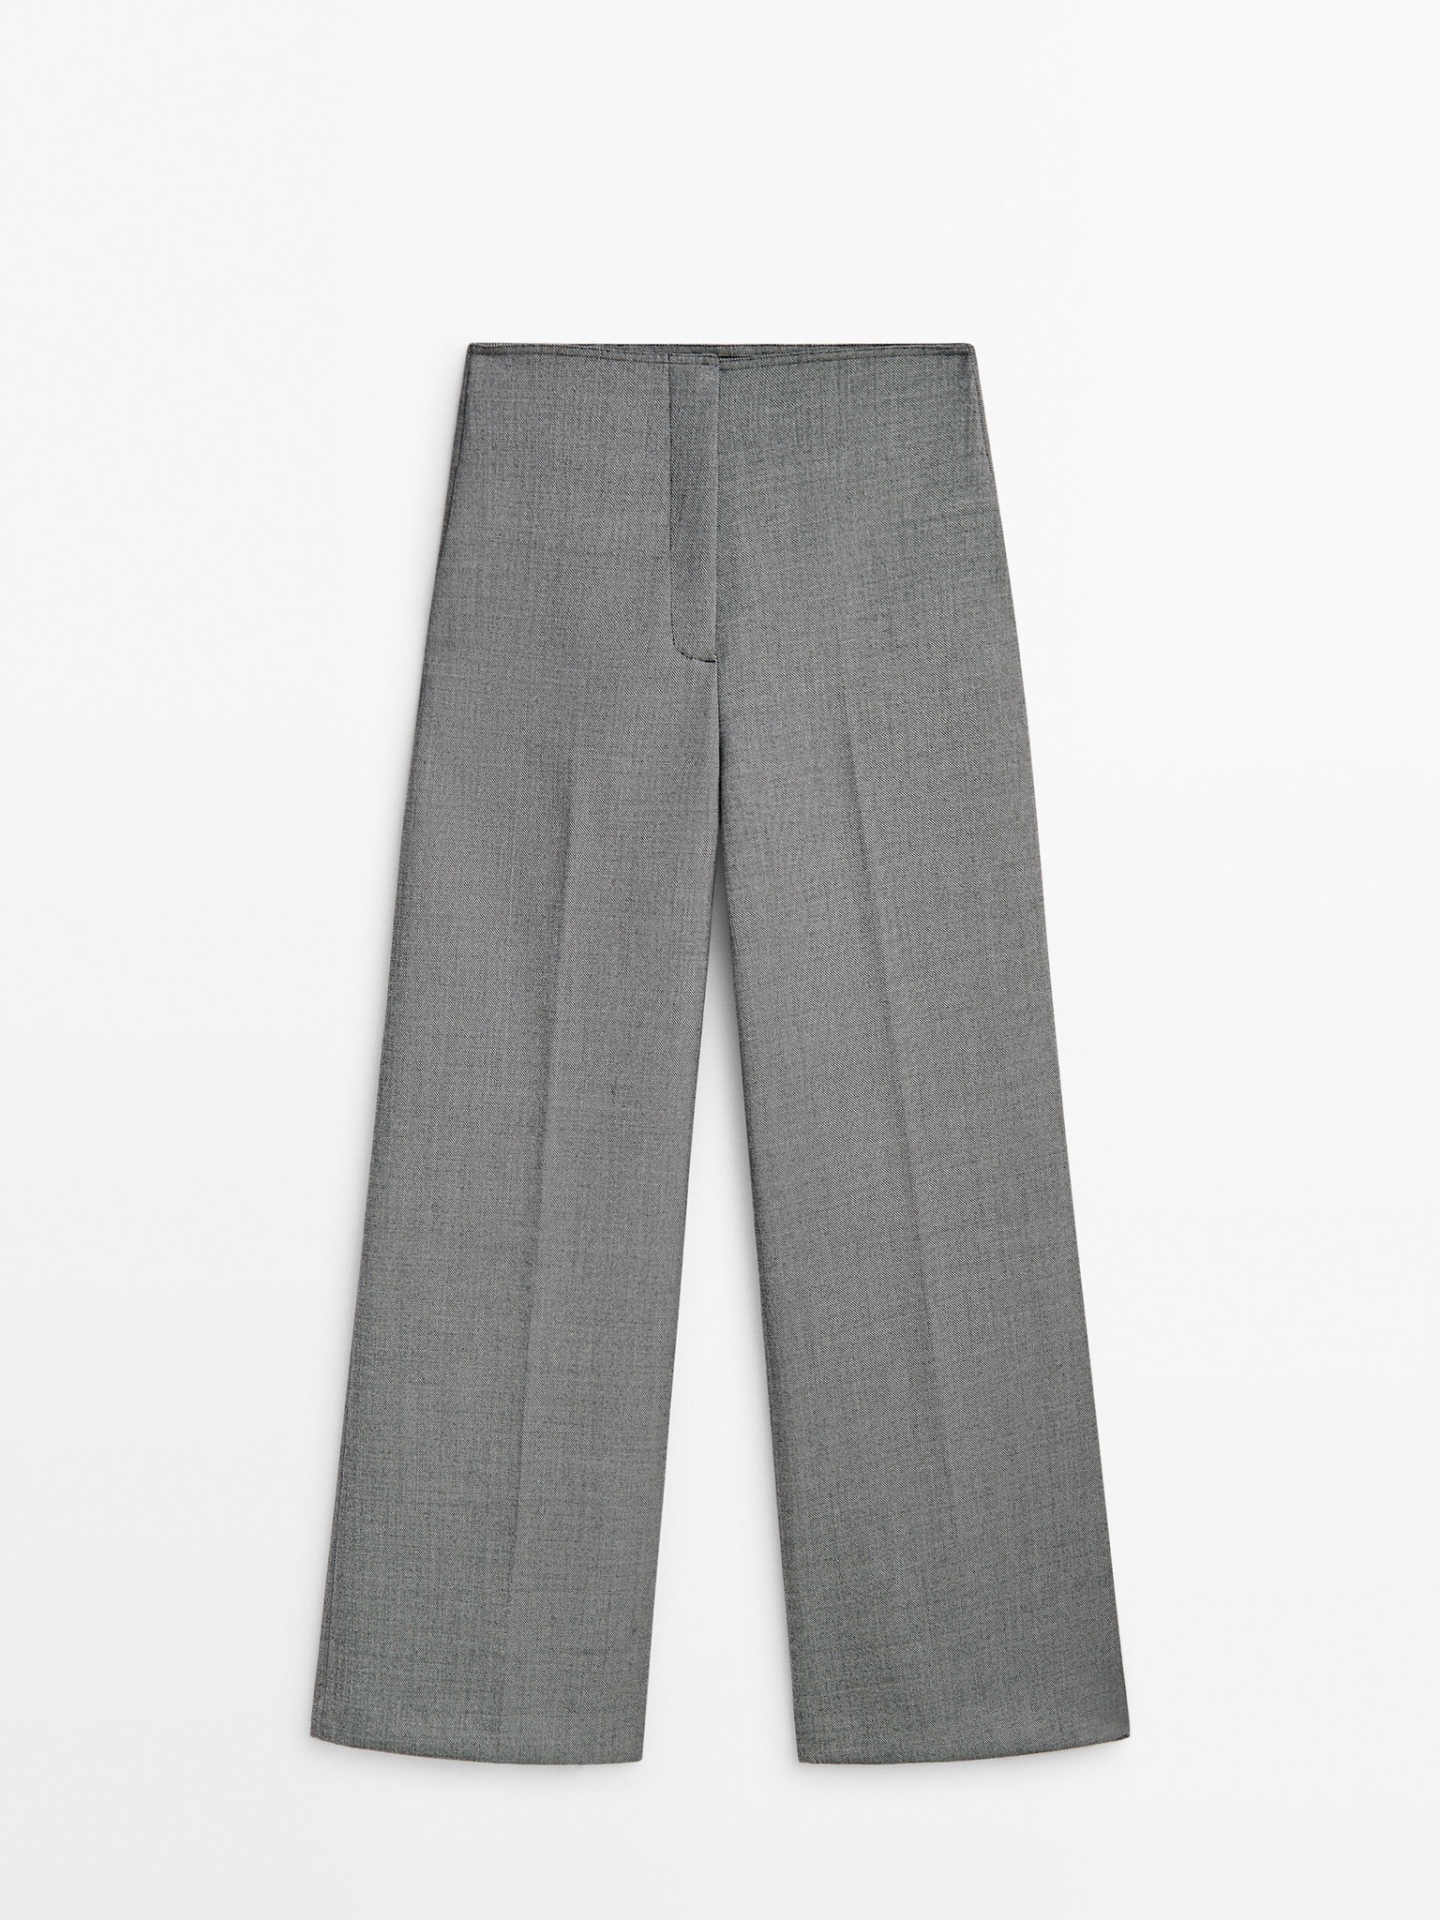 MDTDSB-LEWST01 Massimo Dutti Textured Suit Blazer & Wide Leg Suit Trousers - Limited Edition